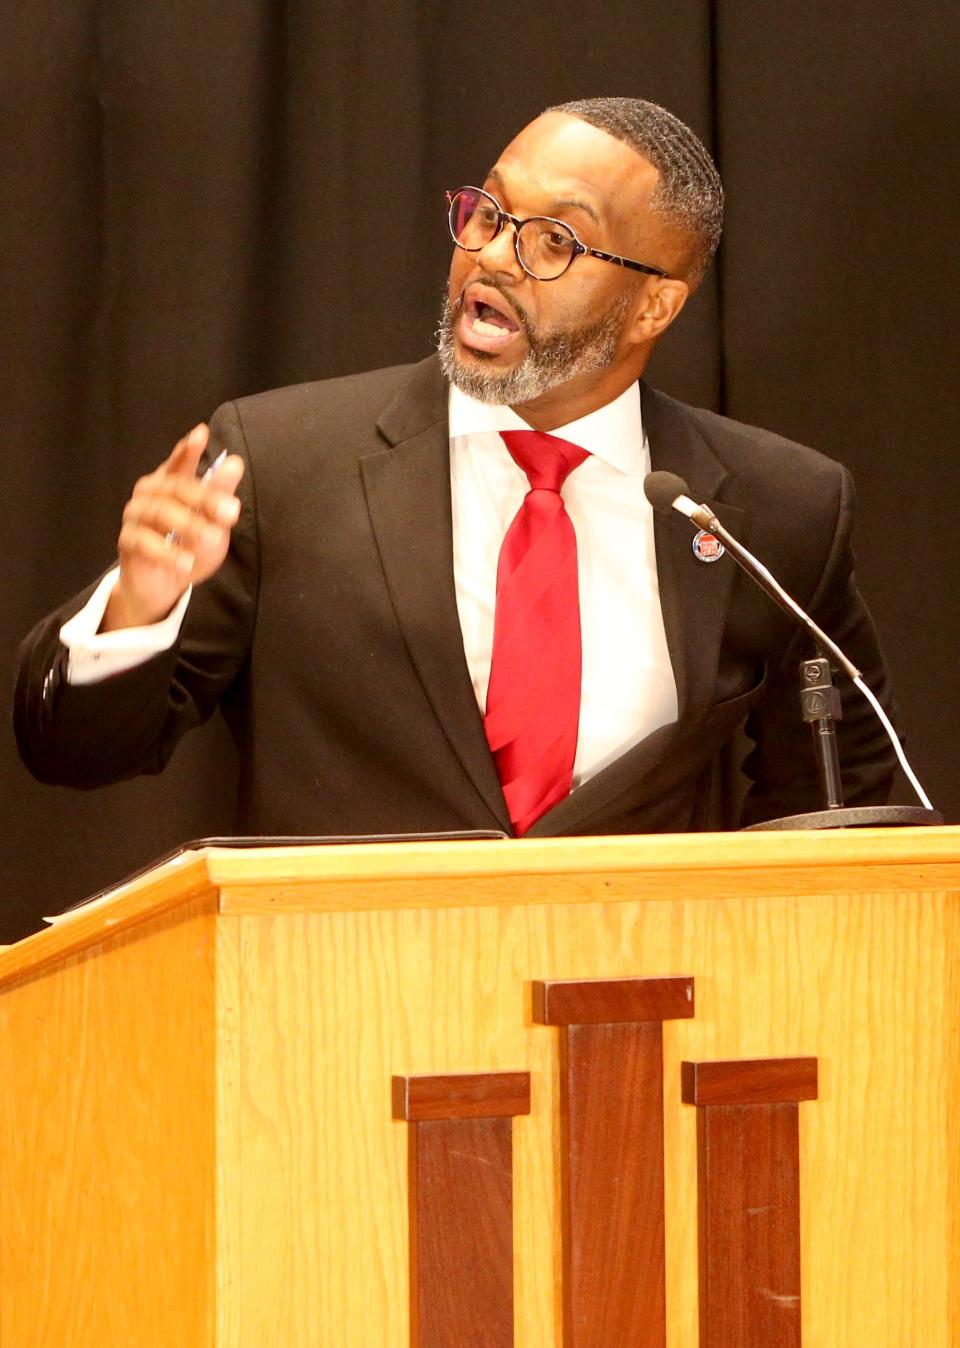 Common Council member Henry Davis Jr., who is seeking the Democratic nomination for South Bend mayor, debates Mayor James Mueller Wednesday, March 15, 2023, at the Democratic South Bend mayoral debate at Indiana University South Bend.